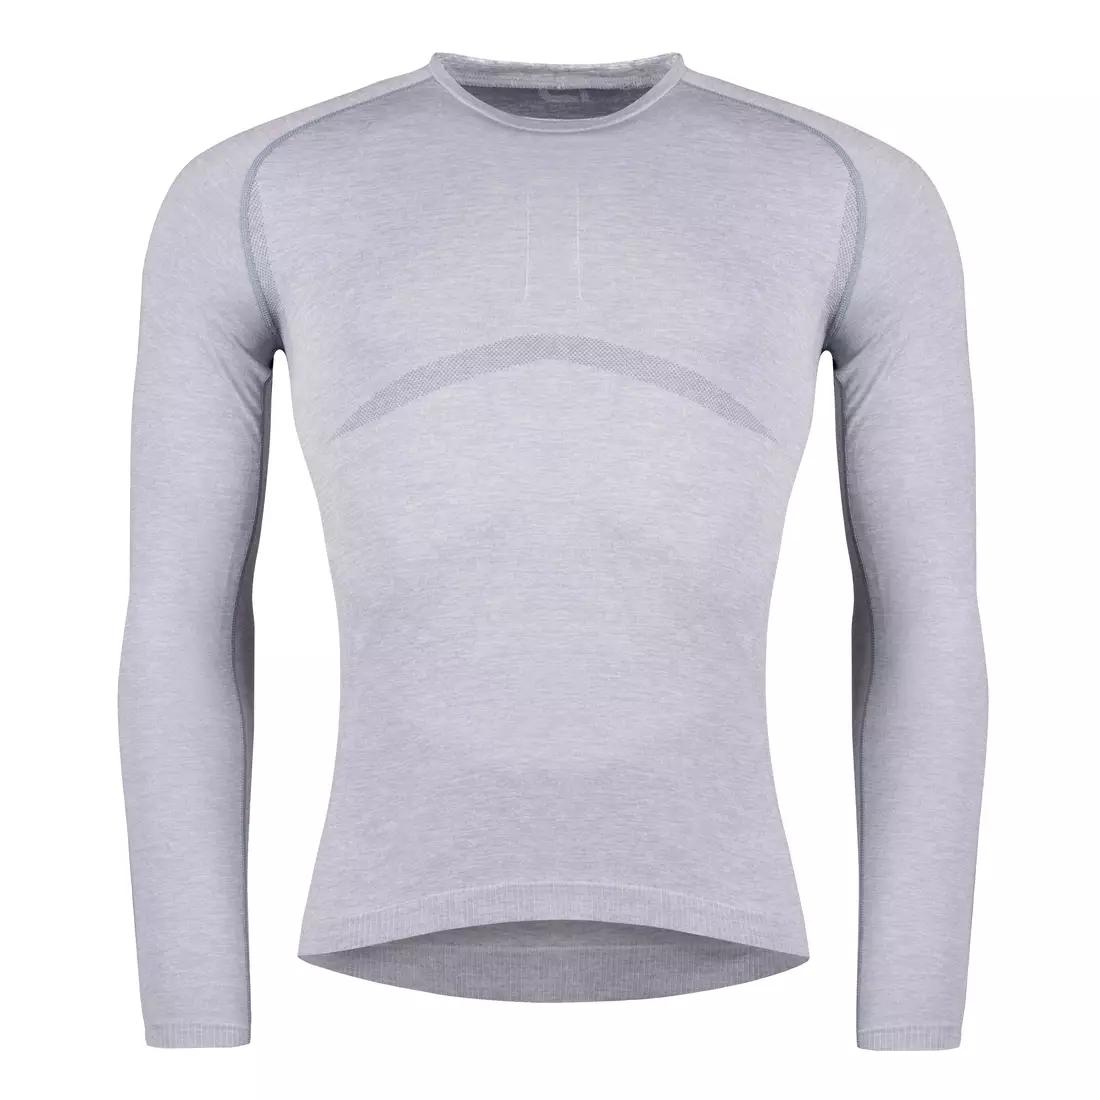 FORCE men's thermoactive t-shirt SOFT grey 9034161